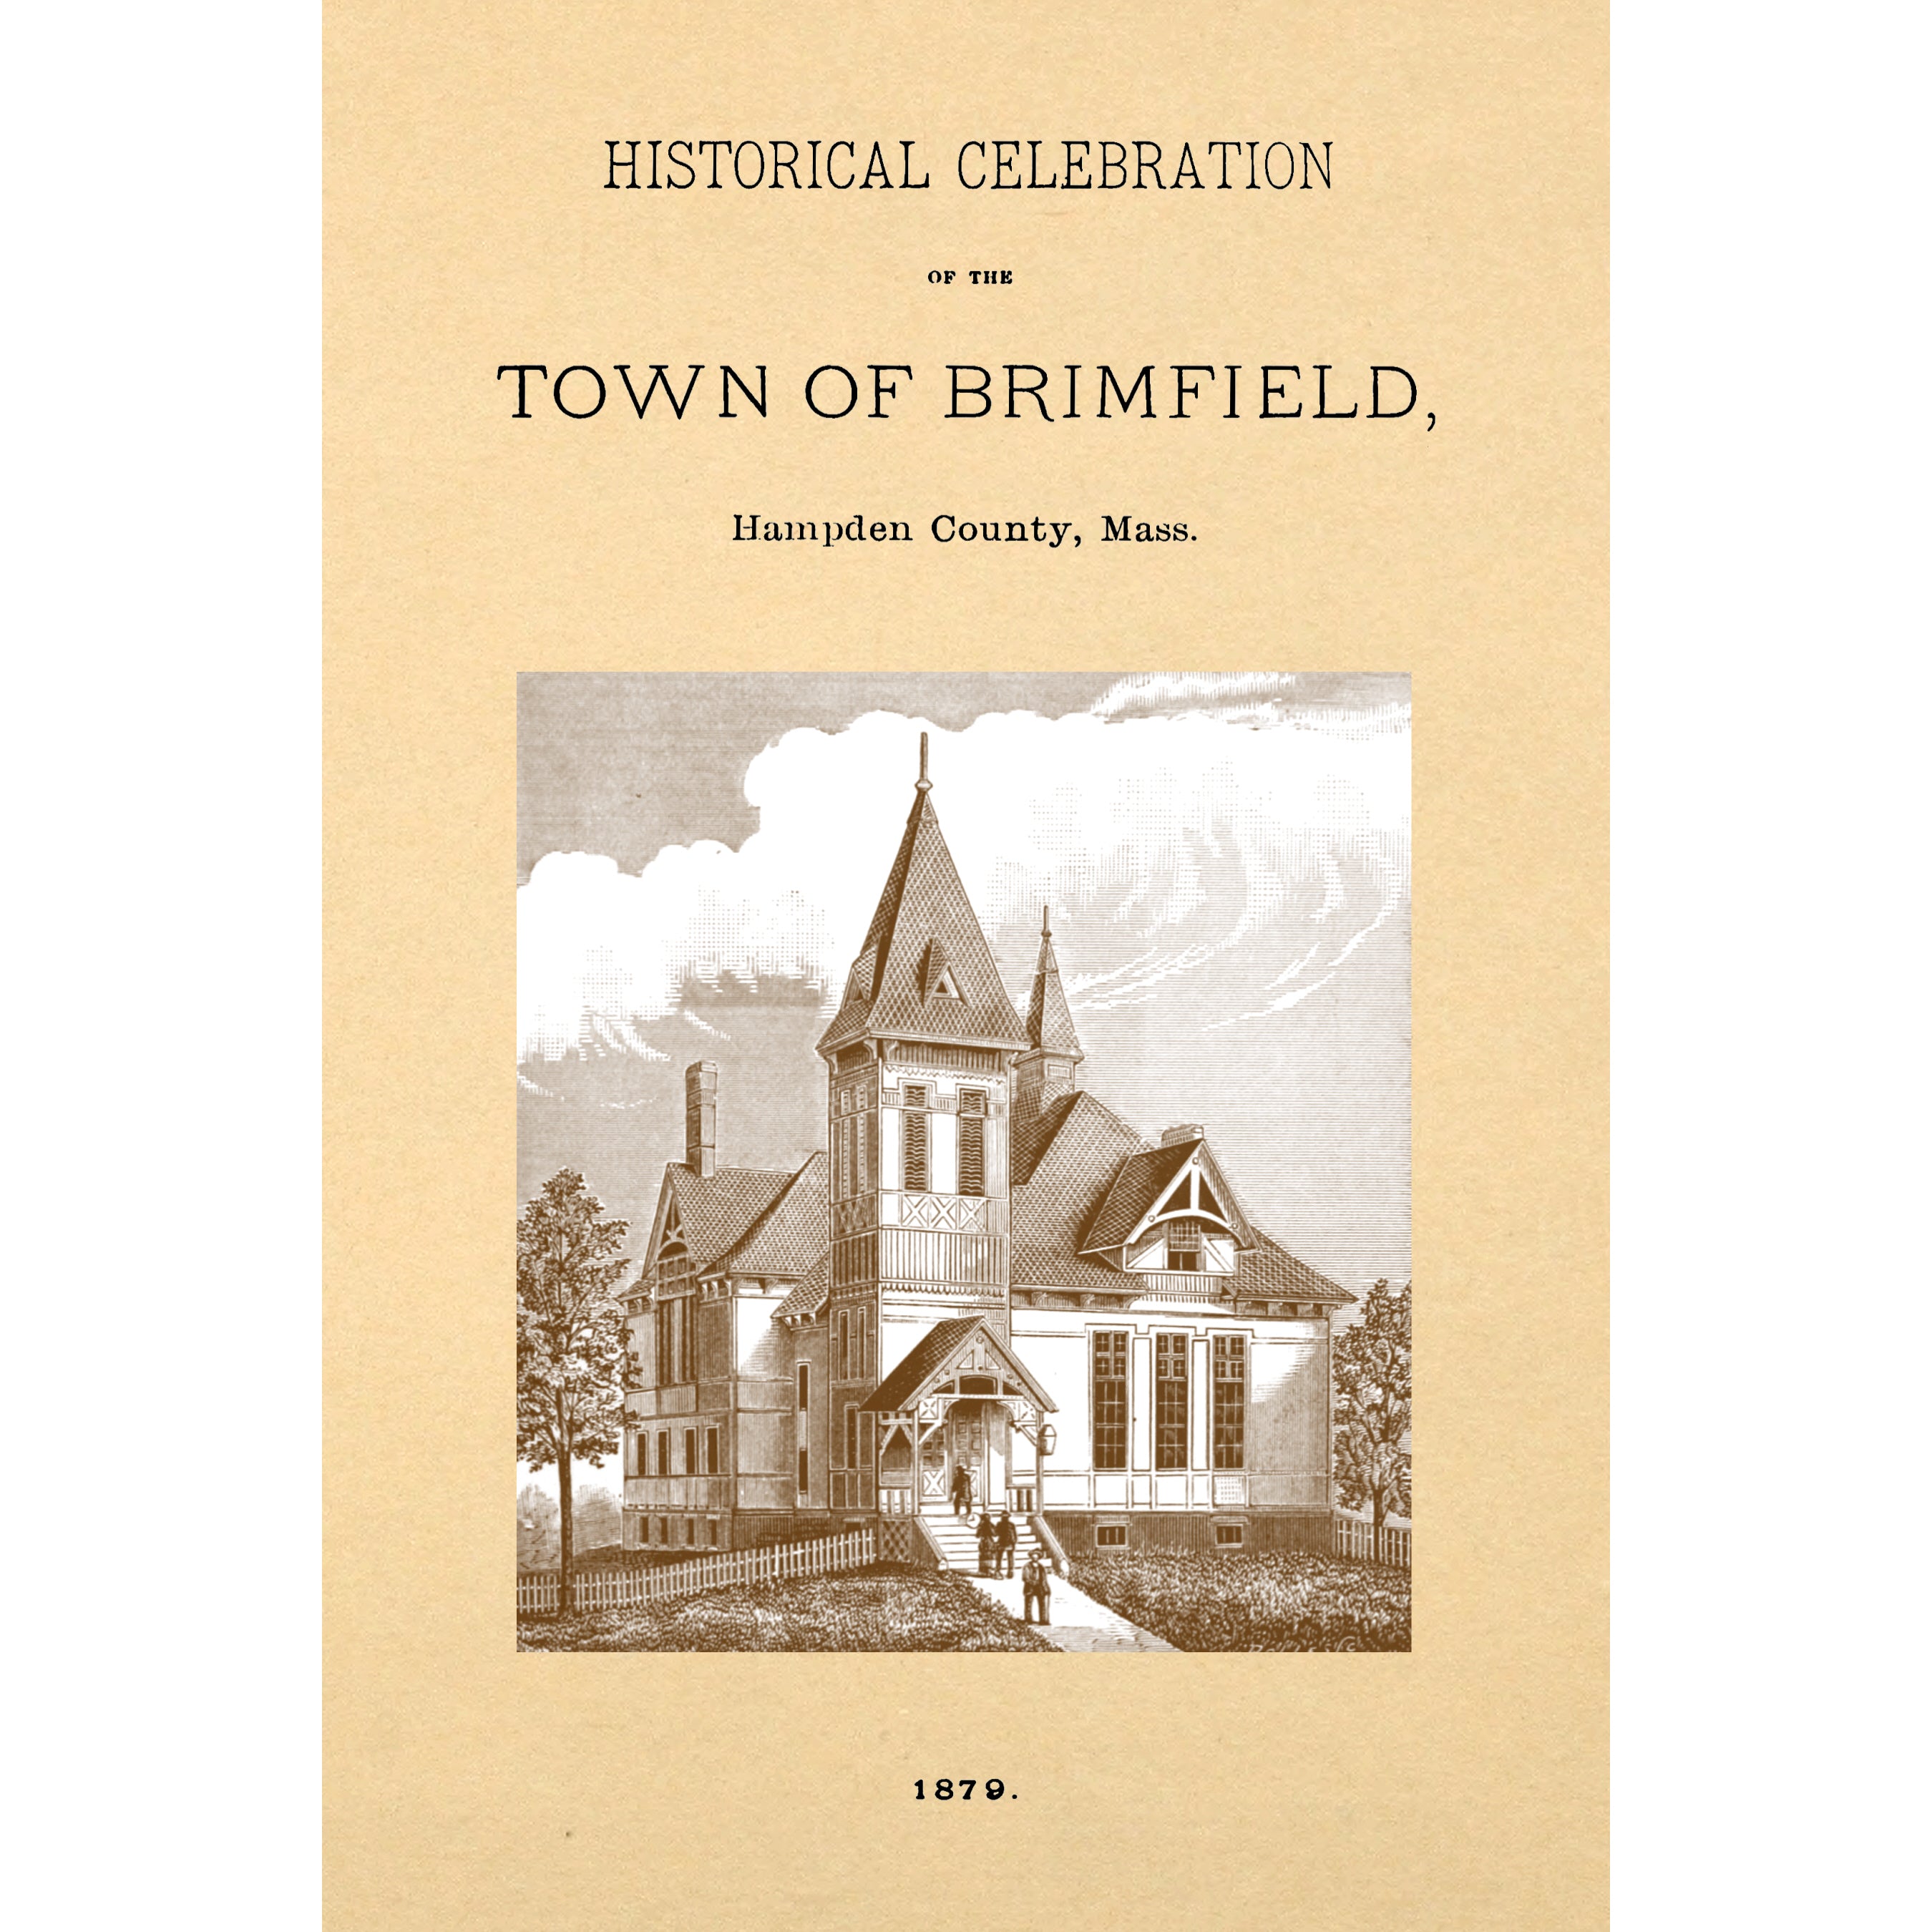 Historical celebration of the town of Brimfield, Hampden County, Mass